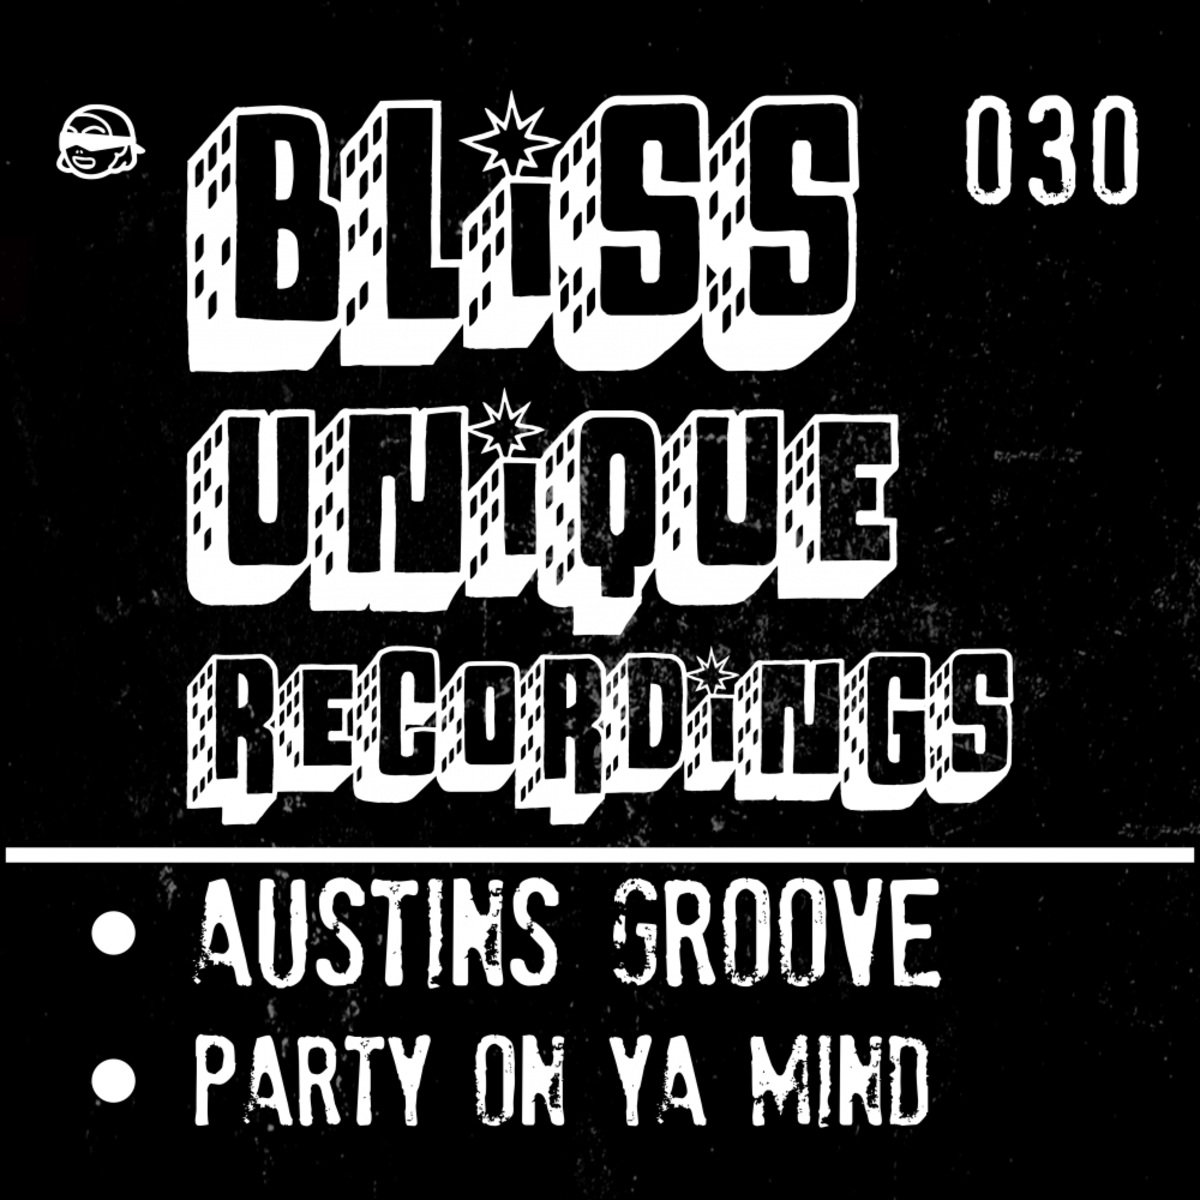 Austins Groove - Party On Ya Mind / Bliss Unique Recordings